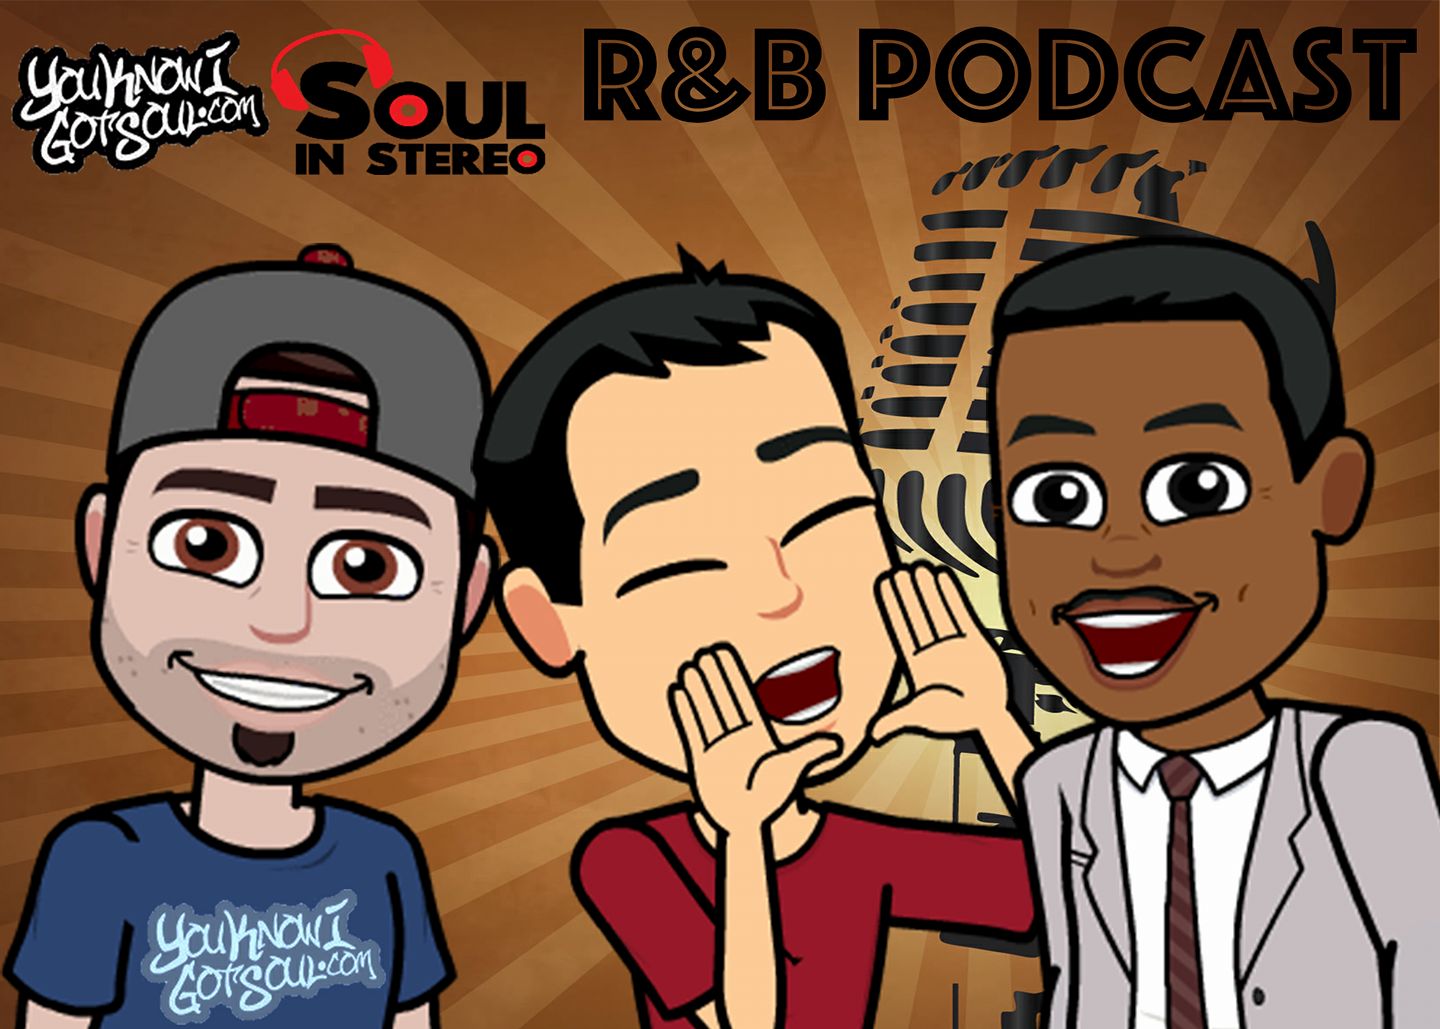 Get Your Wigs Ready, The Braxtons Are About To Snatch Them – YouKnowIGotSoul R&B Podcast Episode #63